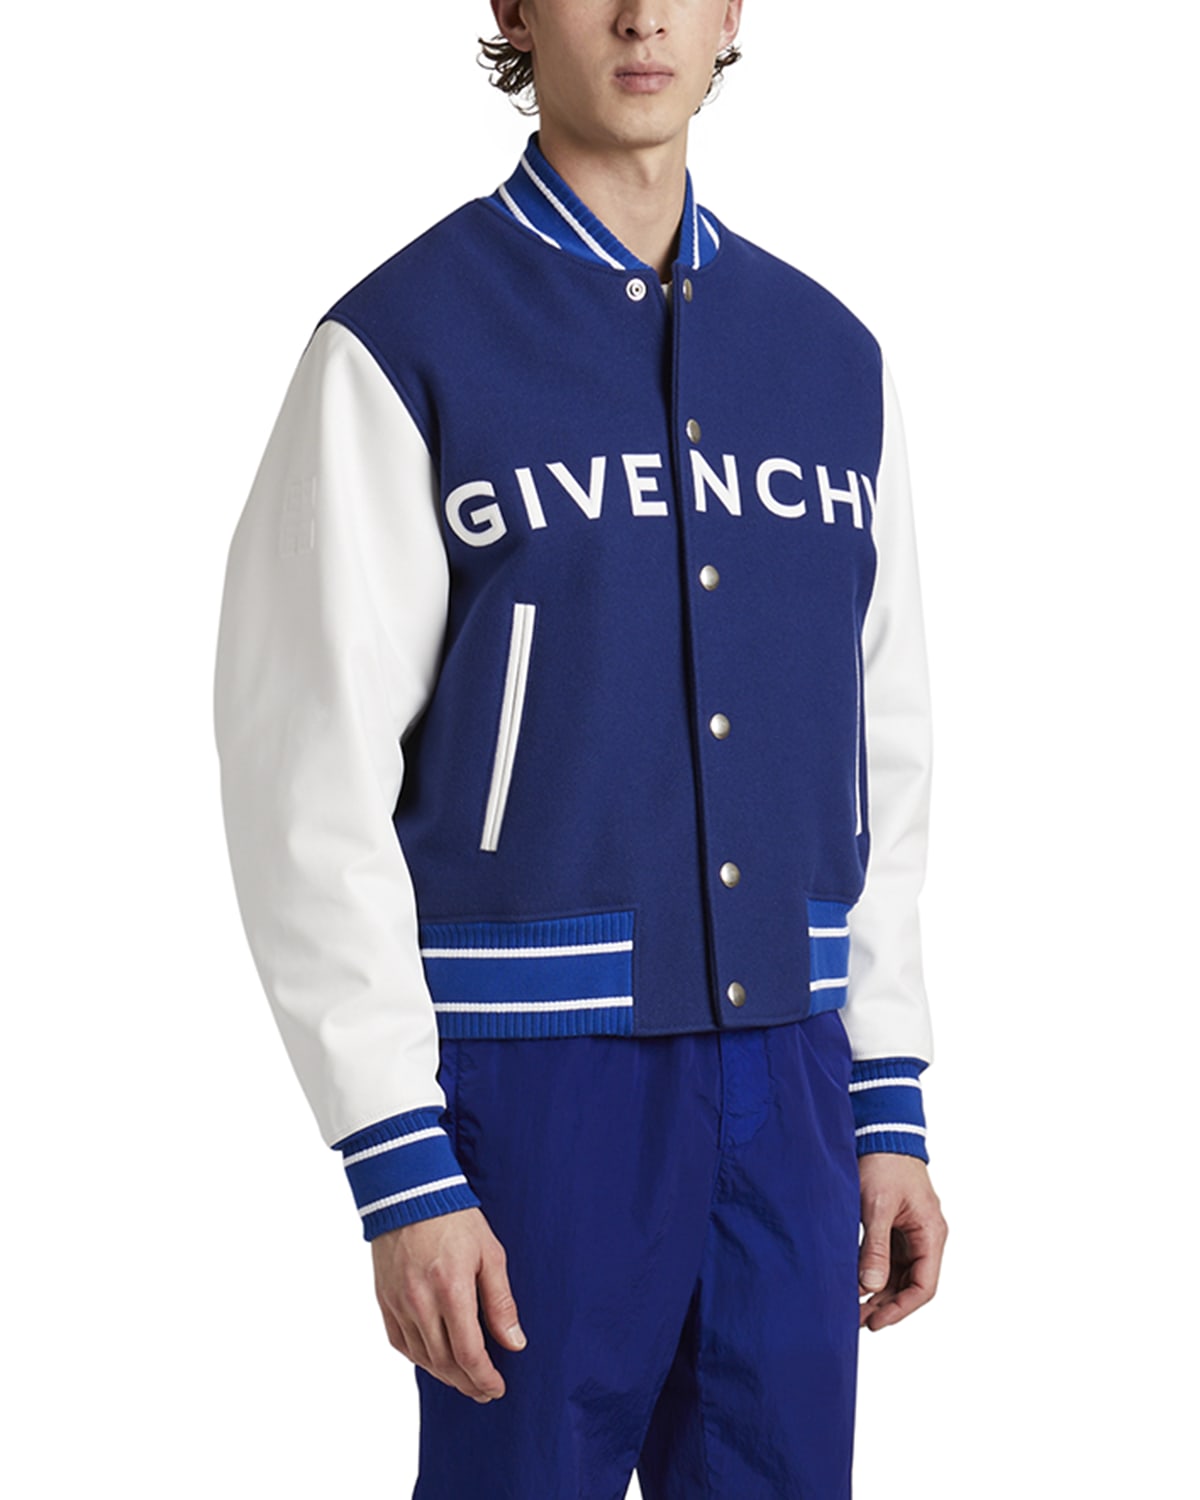 Givenchy Men's Hooded Embroidered Varsity Jacket | Neiman Marcus